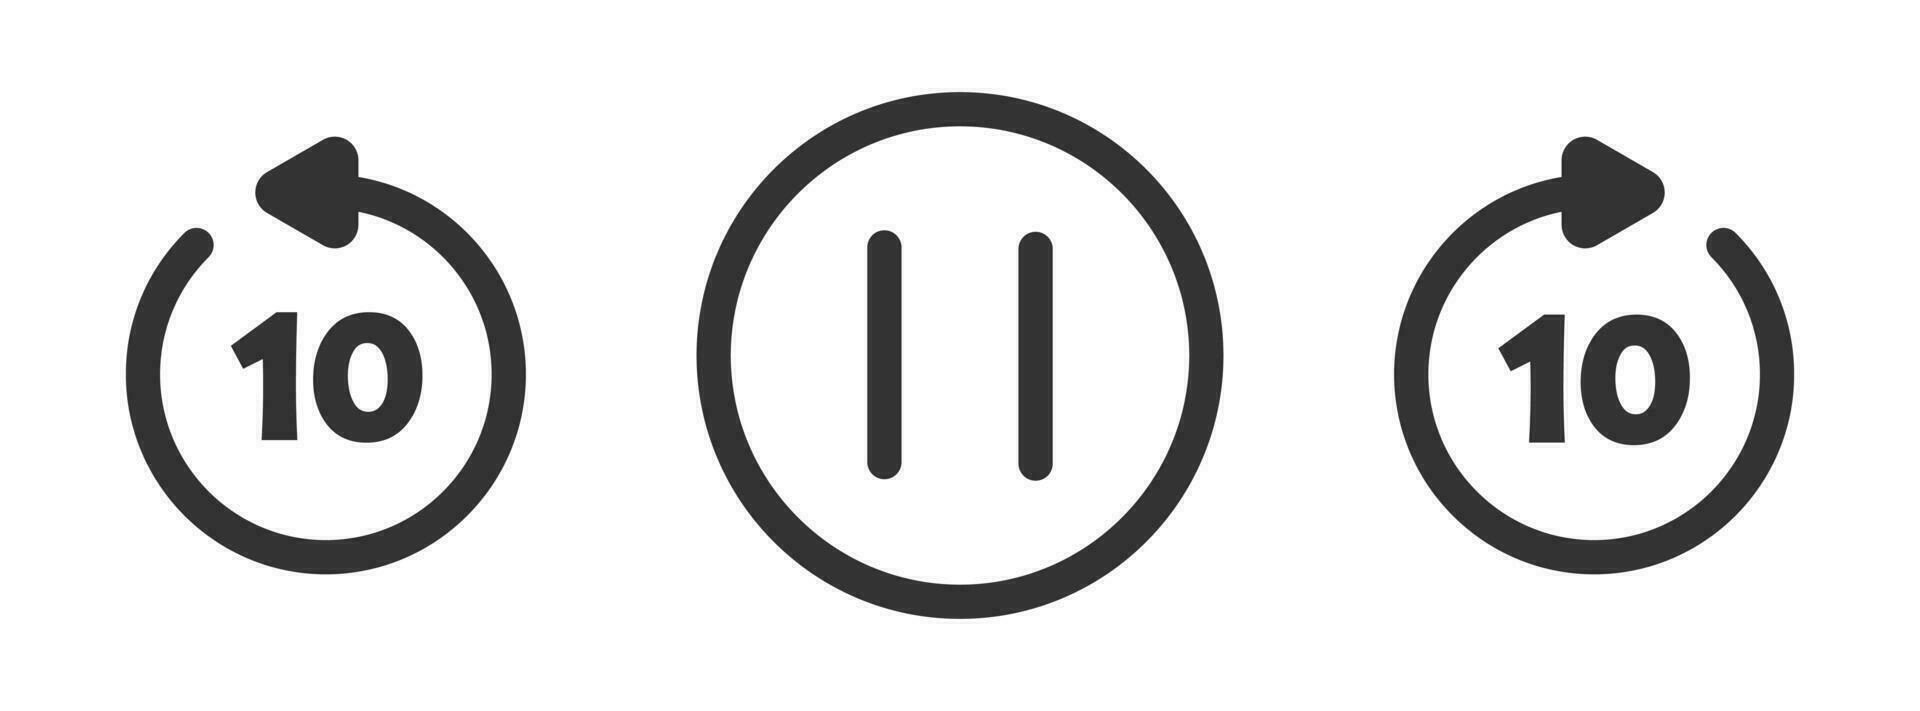 Rewind 10 seconds, pause, fast forward 10 seconds icon. Media symbol. Sign app button vector. vector